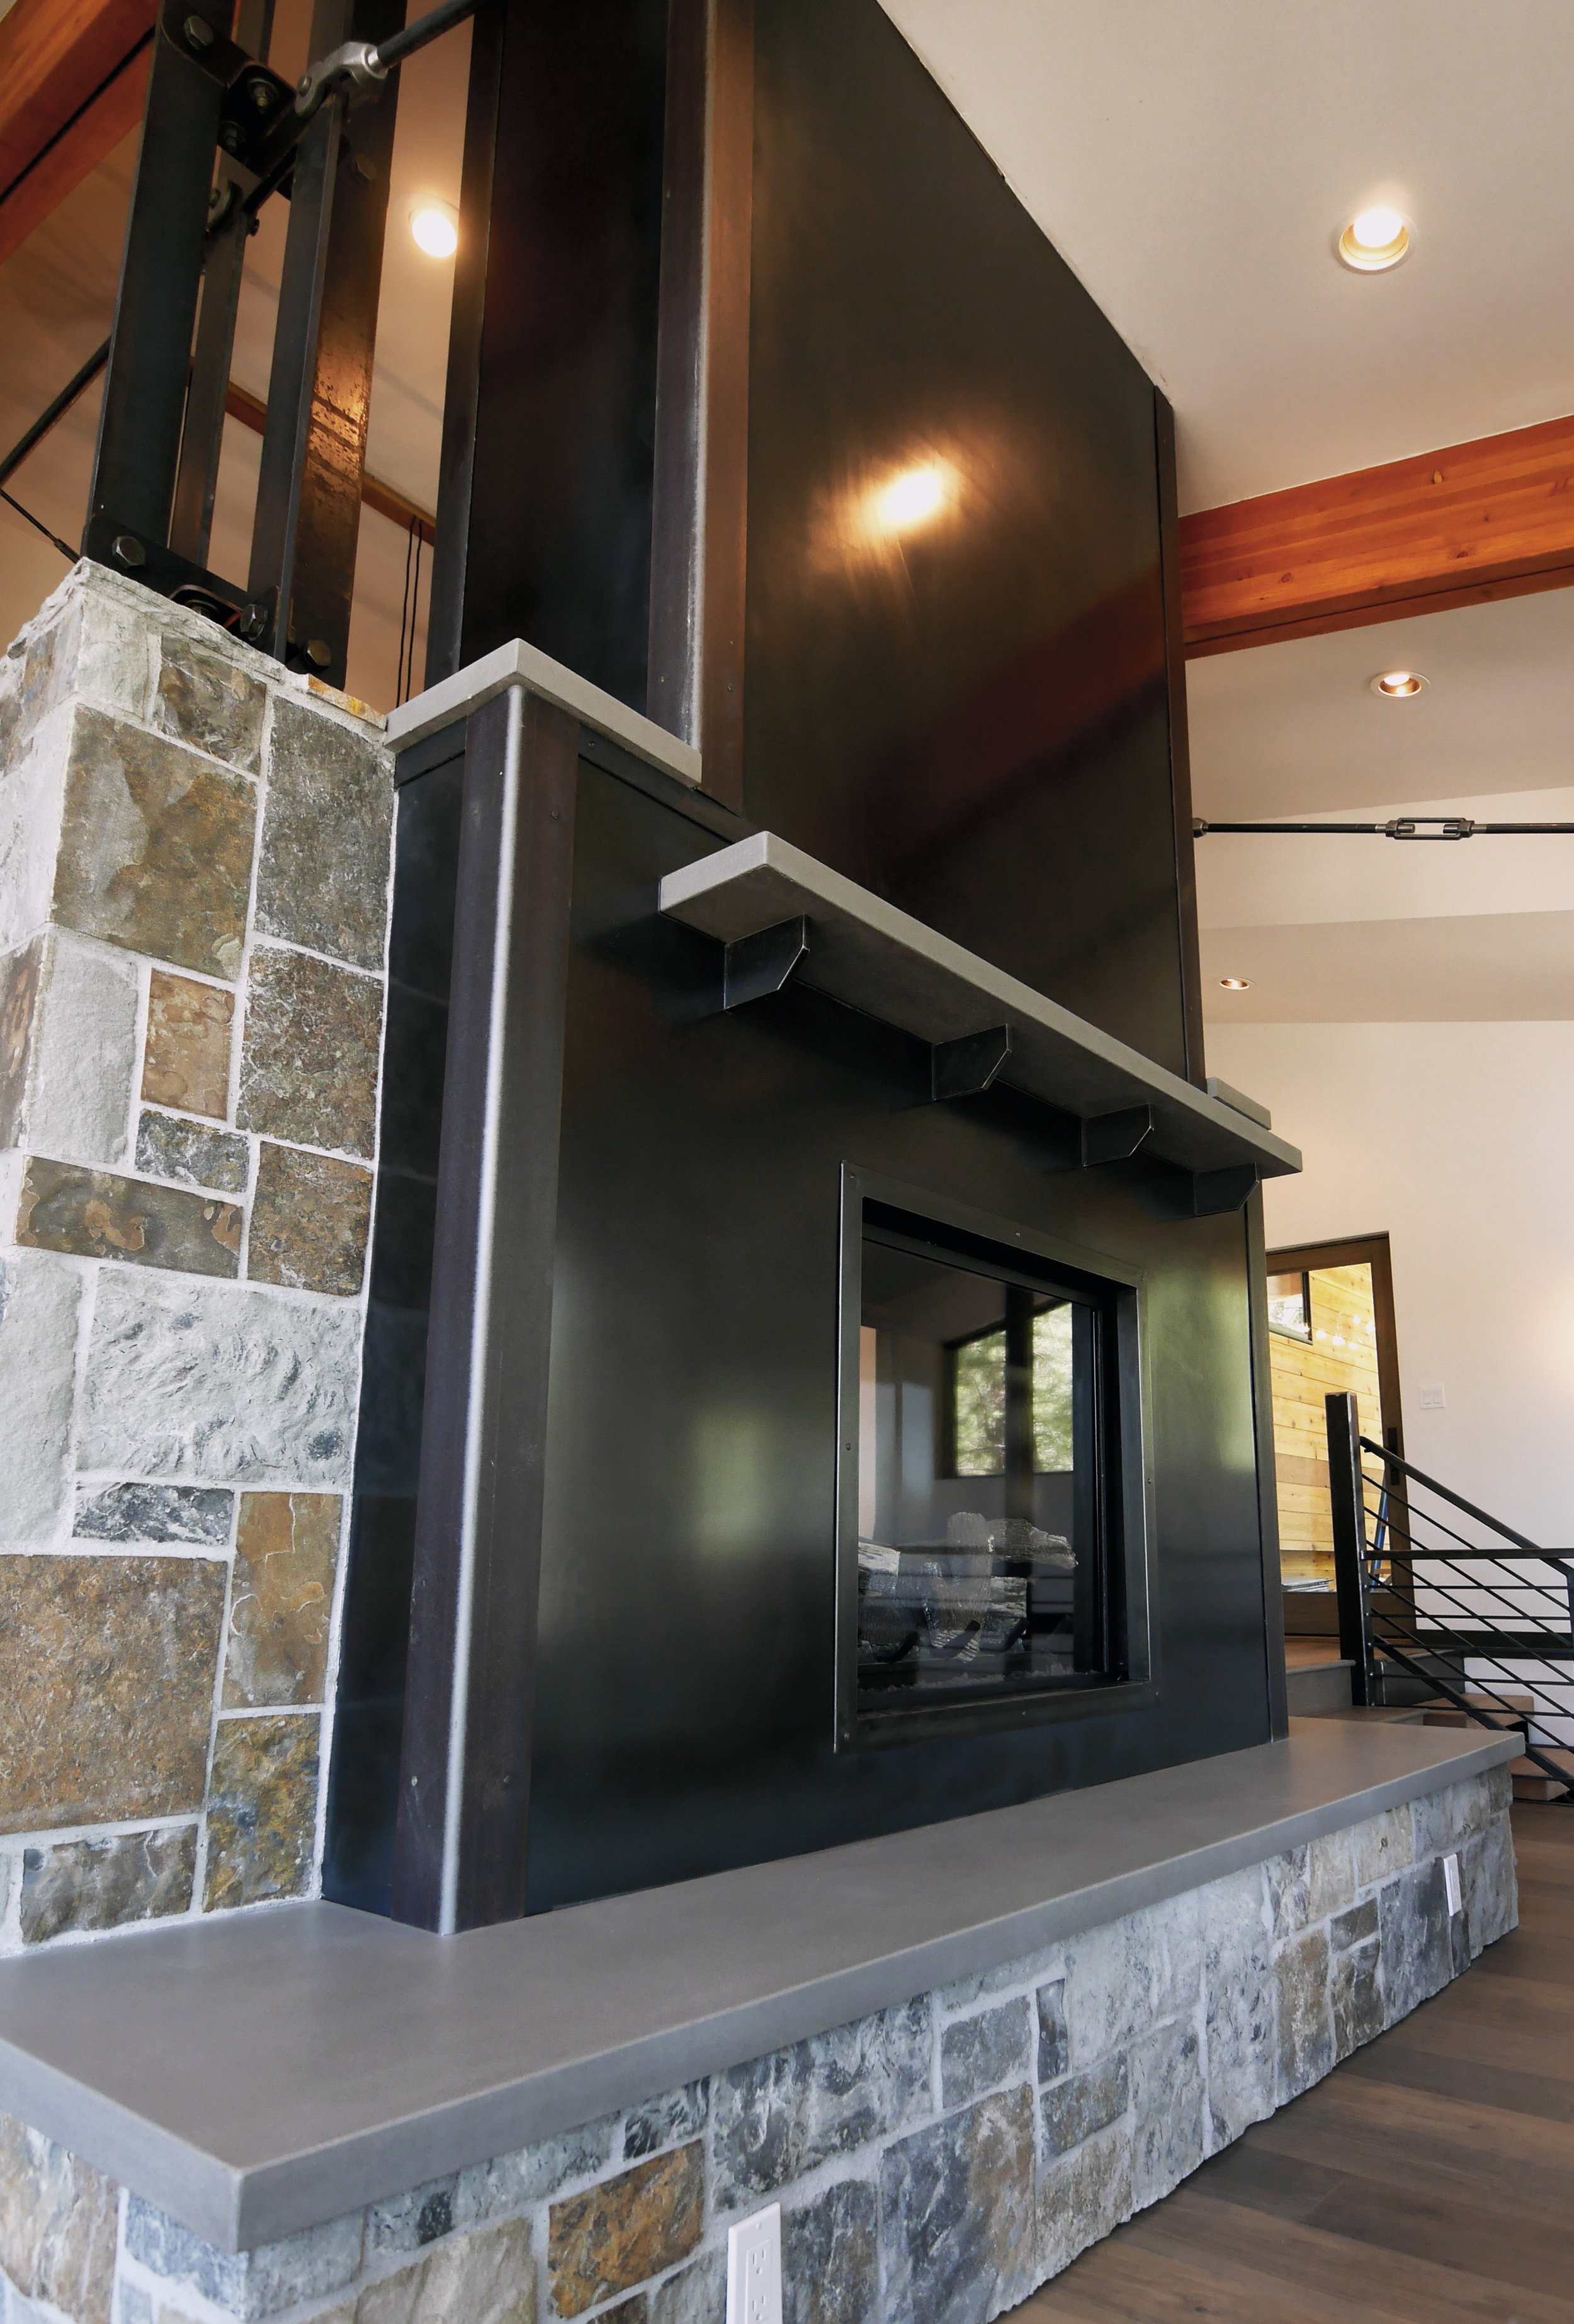 Steel Panel Fireplace with Floating Concrete Mantle and Hearth.jpg